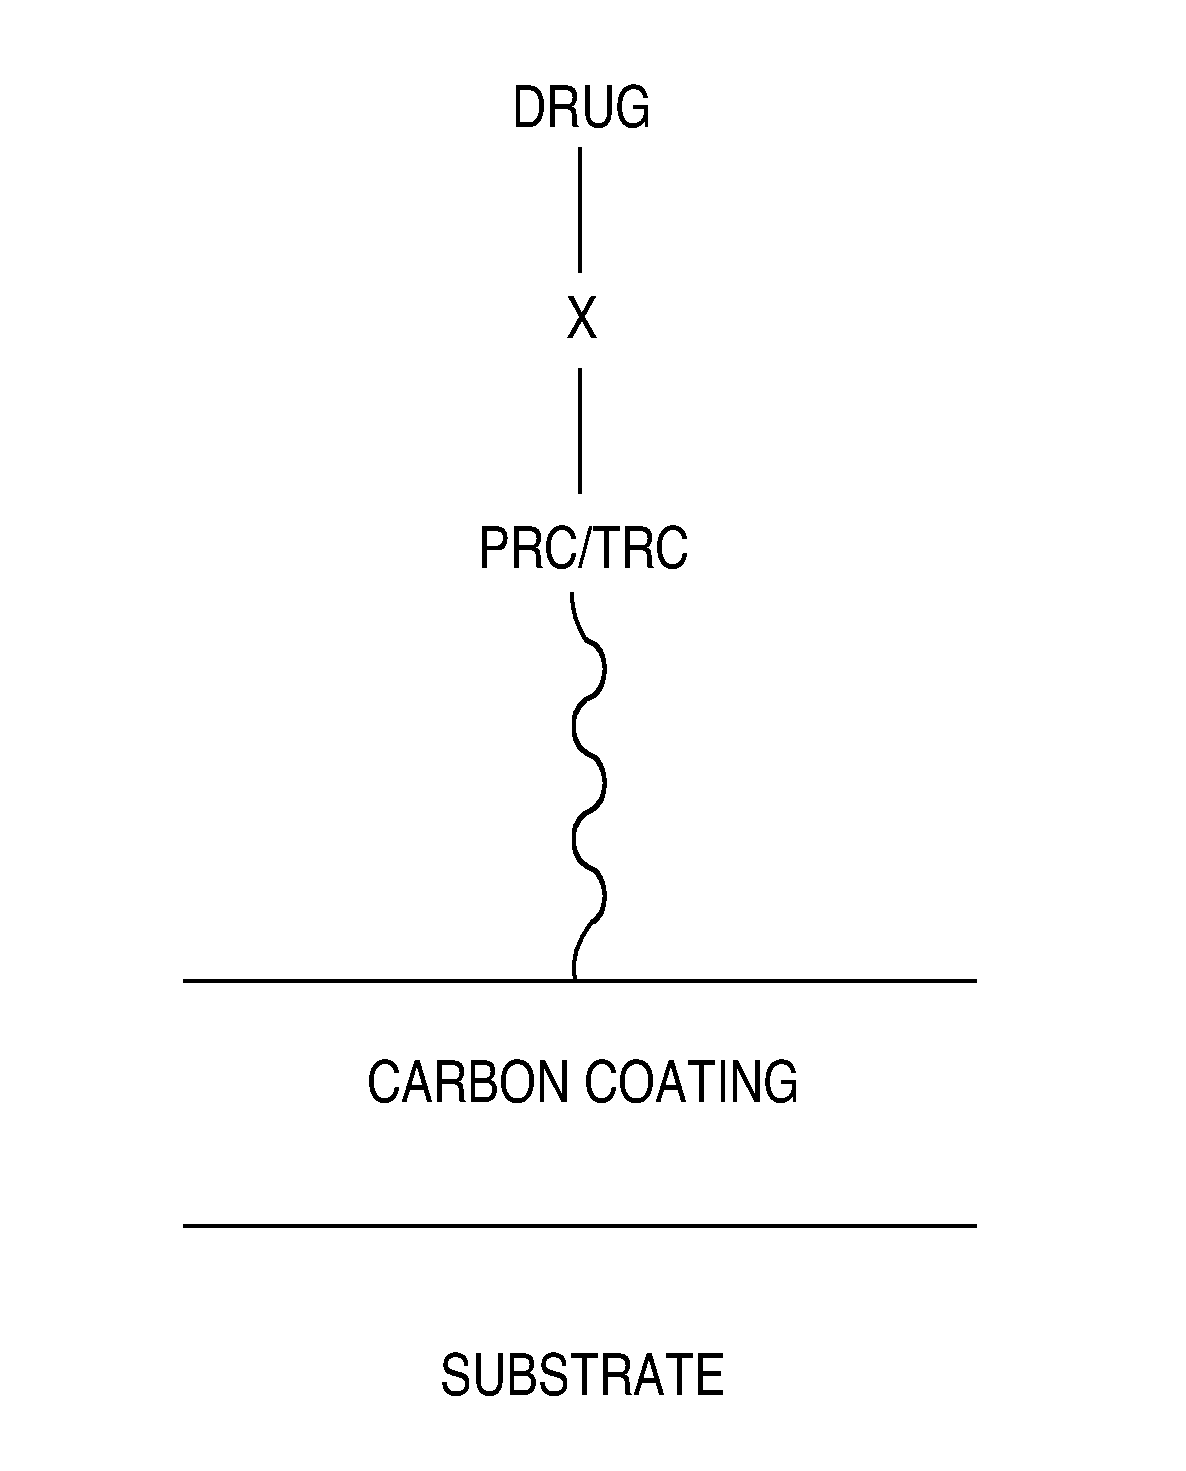 Carbon coating on an implantable device